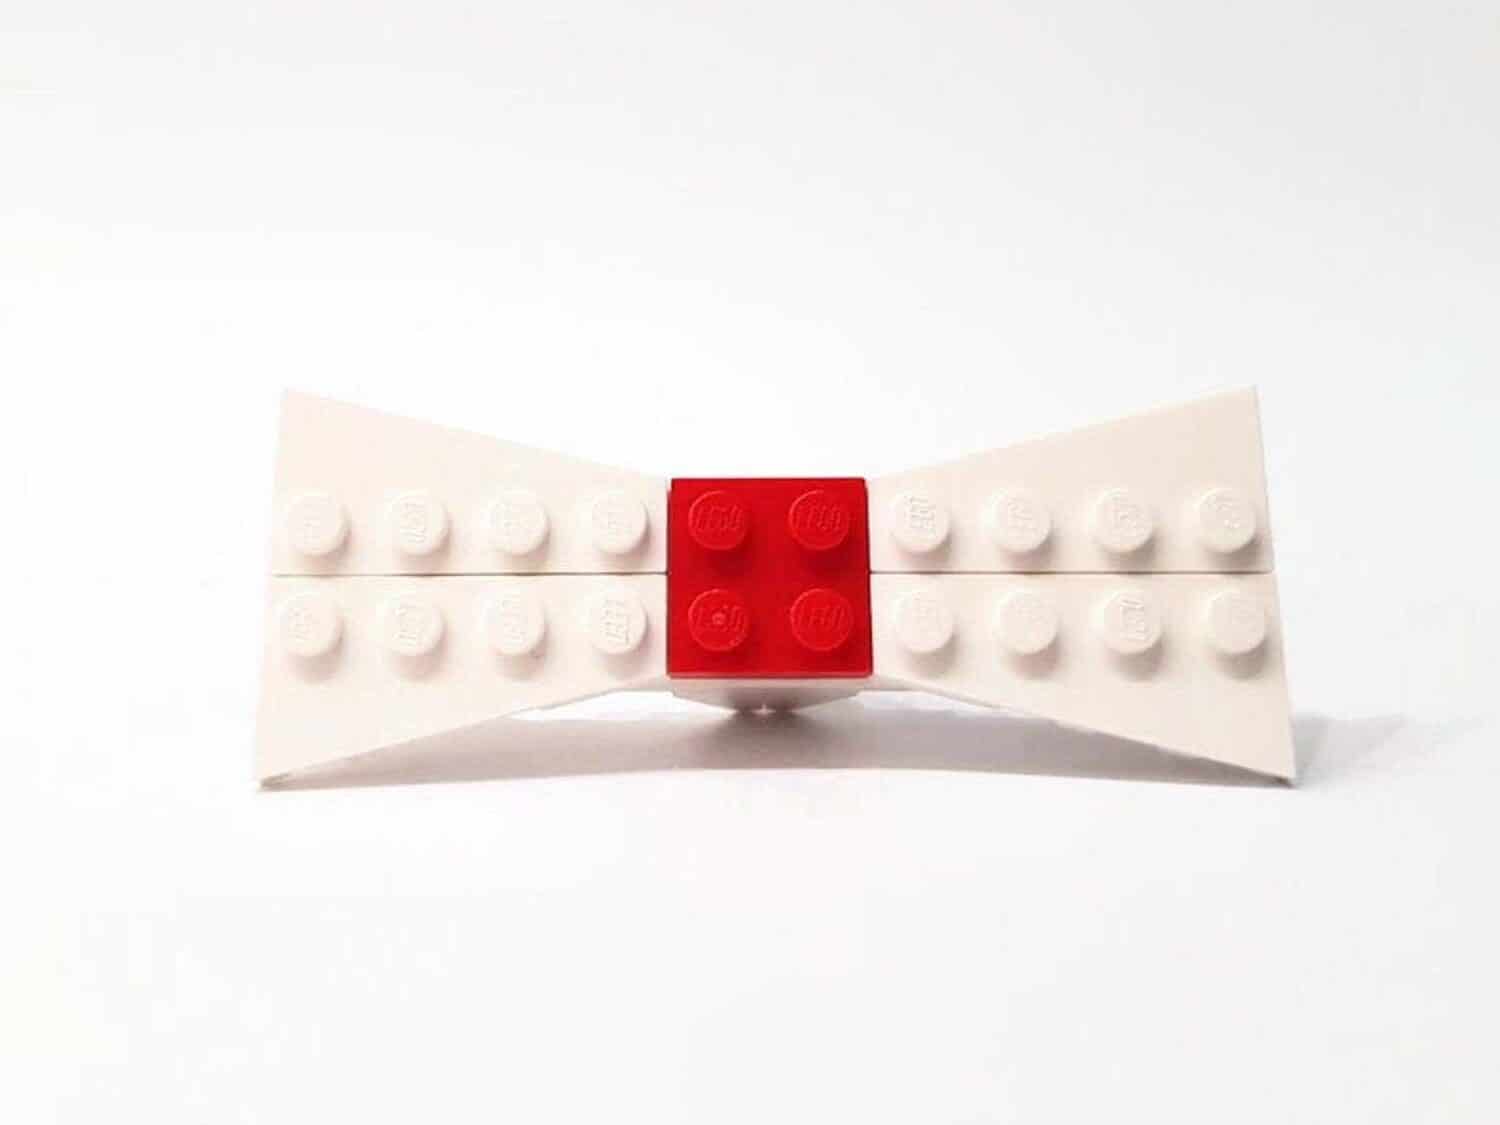 LEGO Bowtie, white and red.